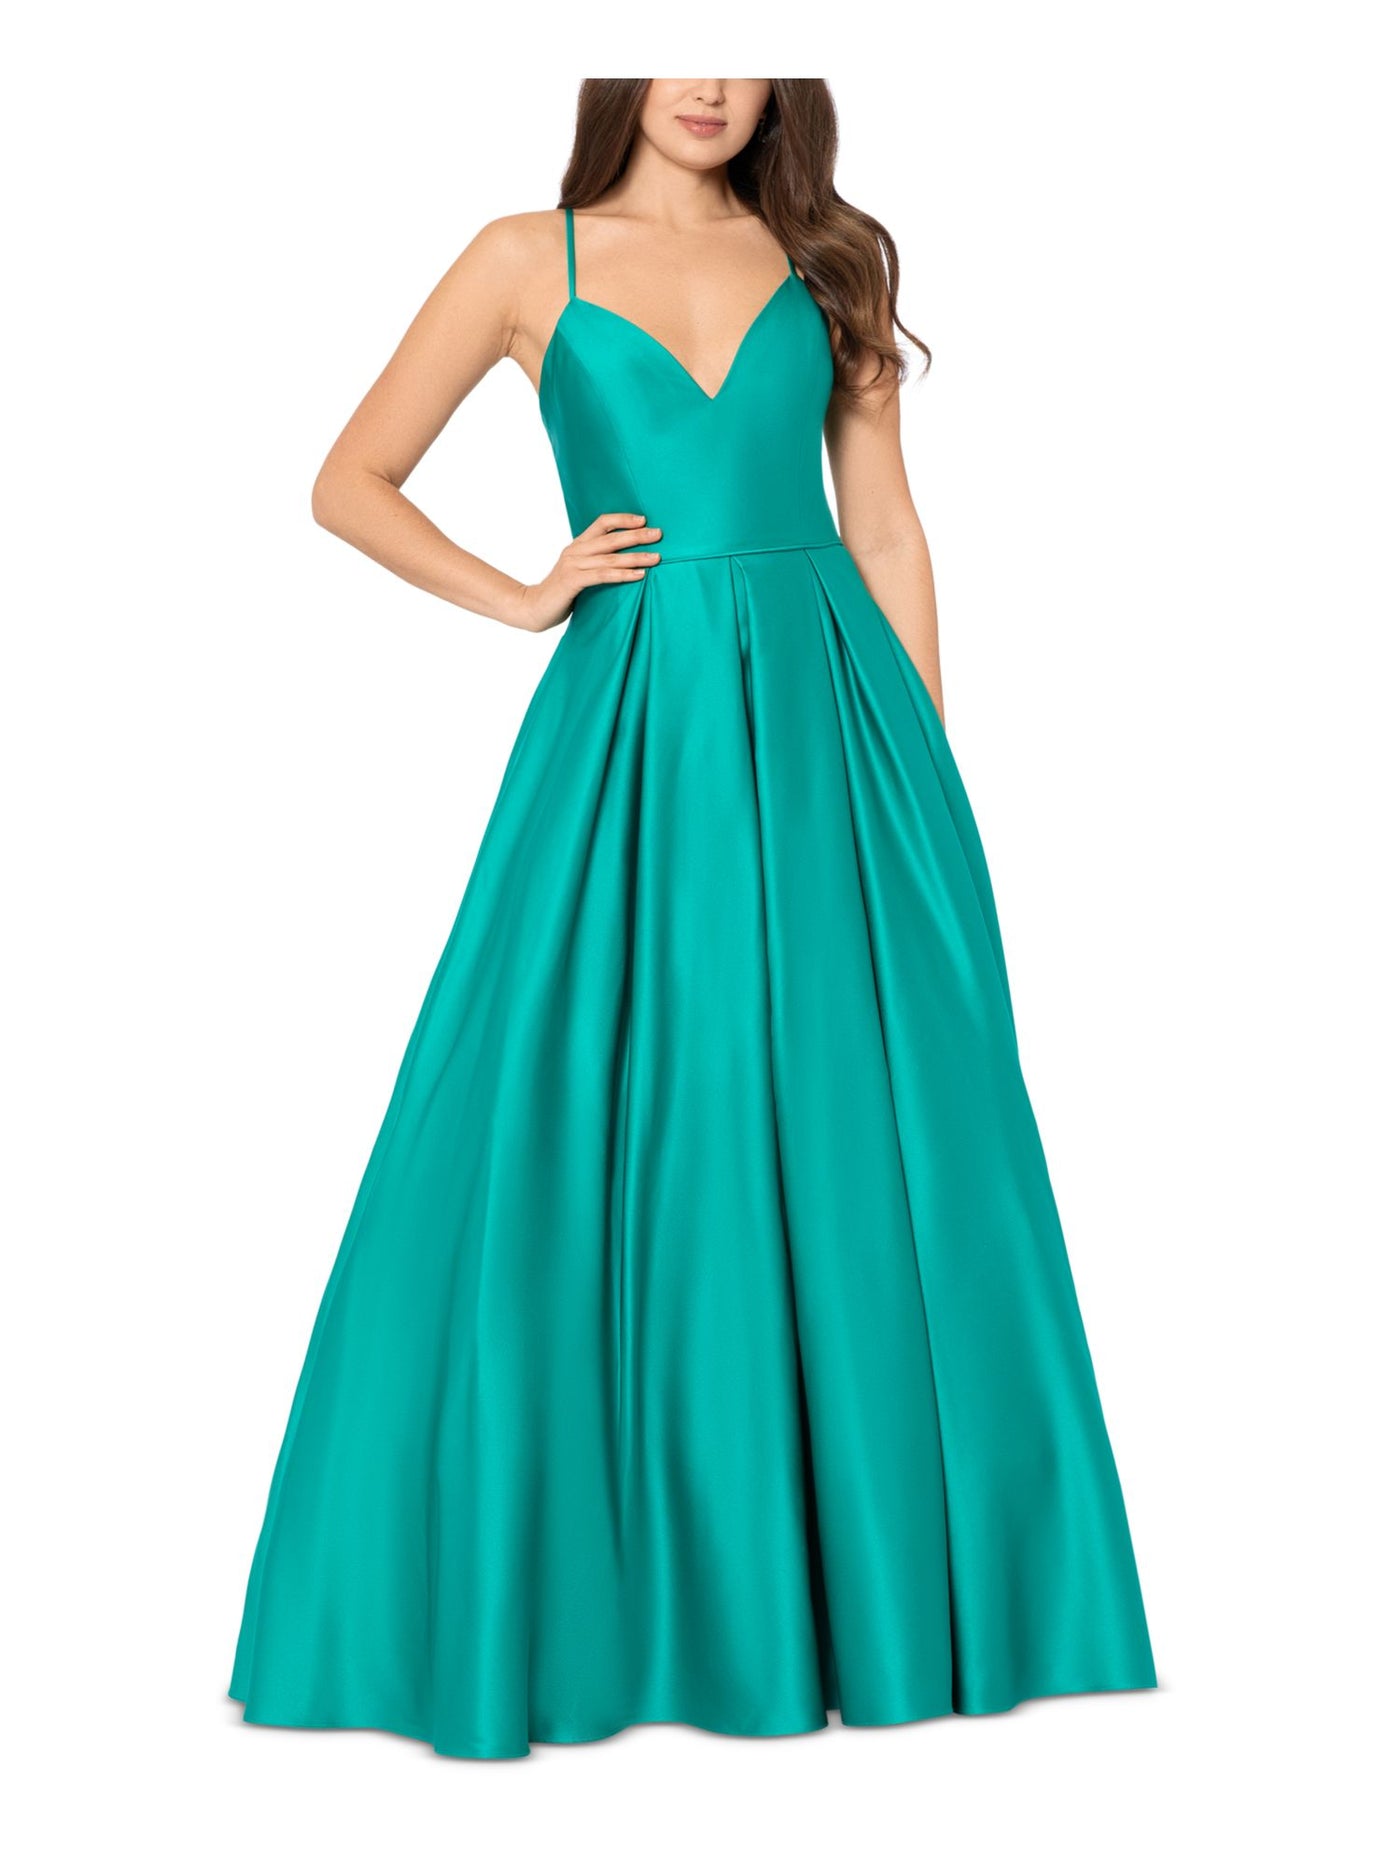 BLONDIE NITES Womens Teal Zippered Pleated Lace-up Back Pocketed Lined Spaghetti Strap V Neck Full-Length Prom Gown Dress Juniors 7